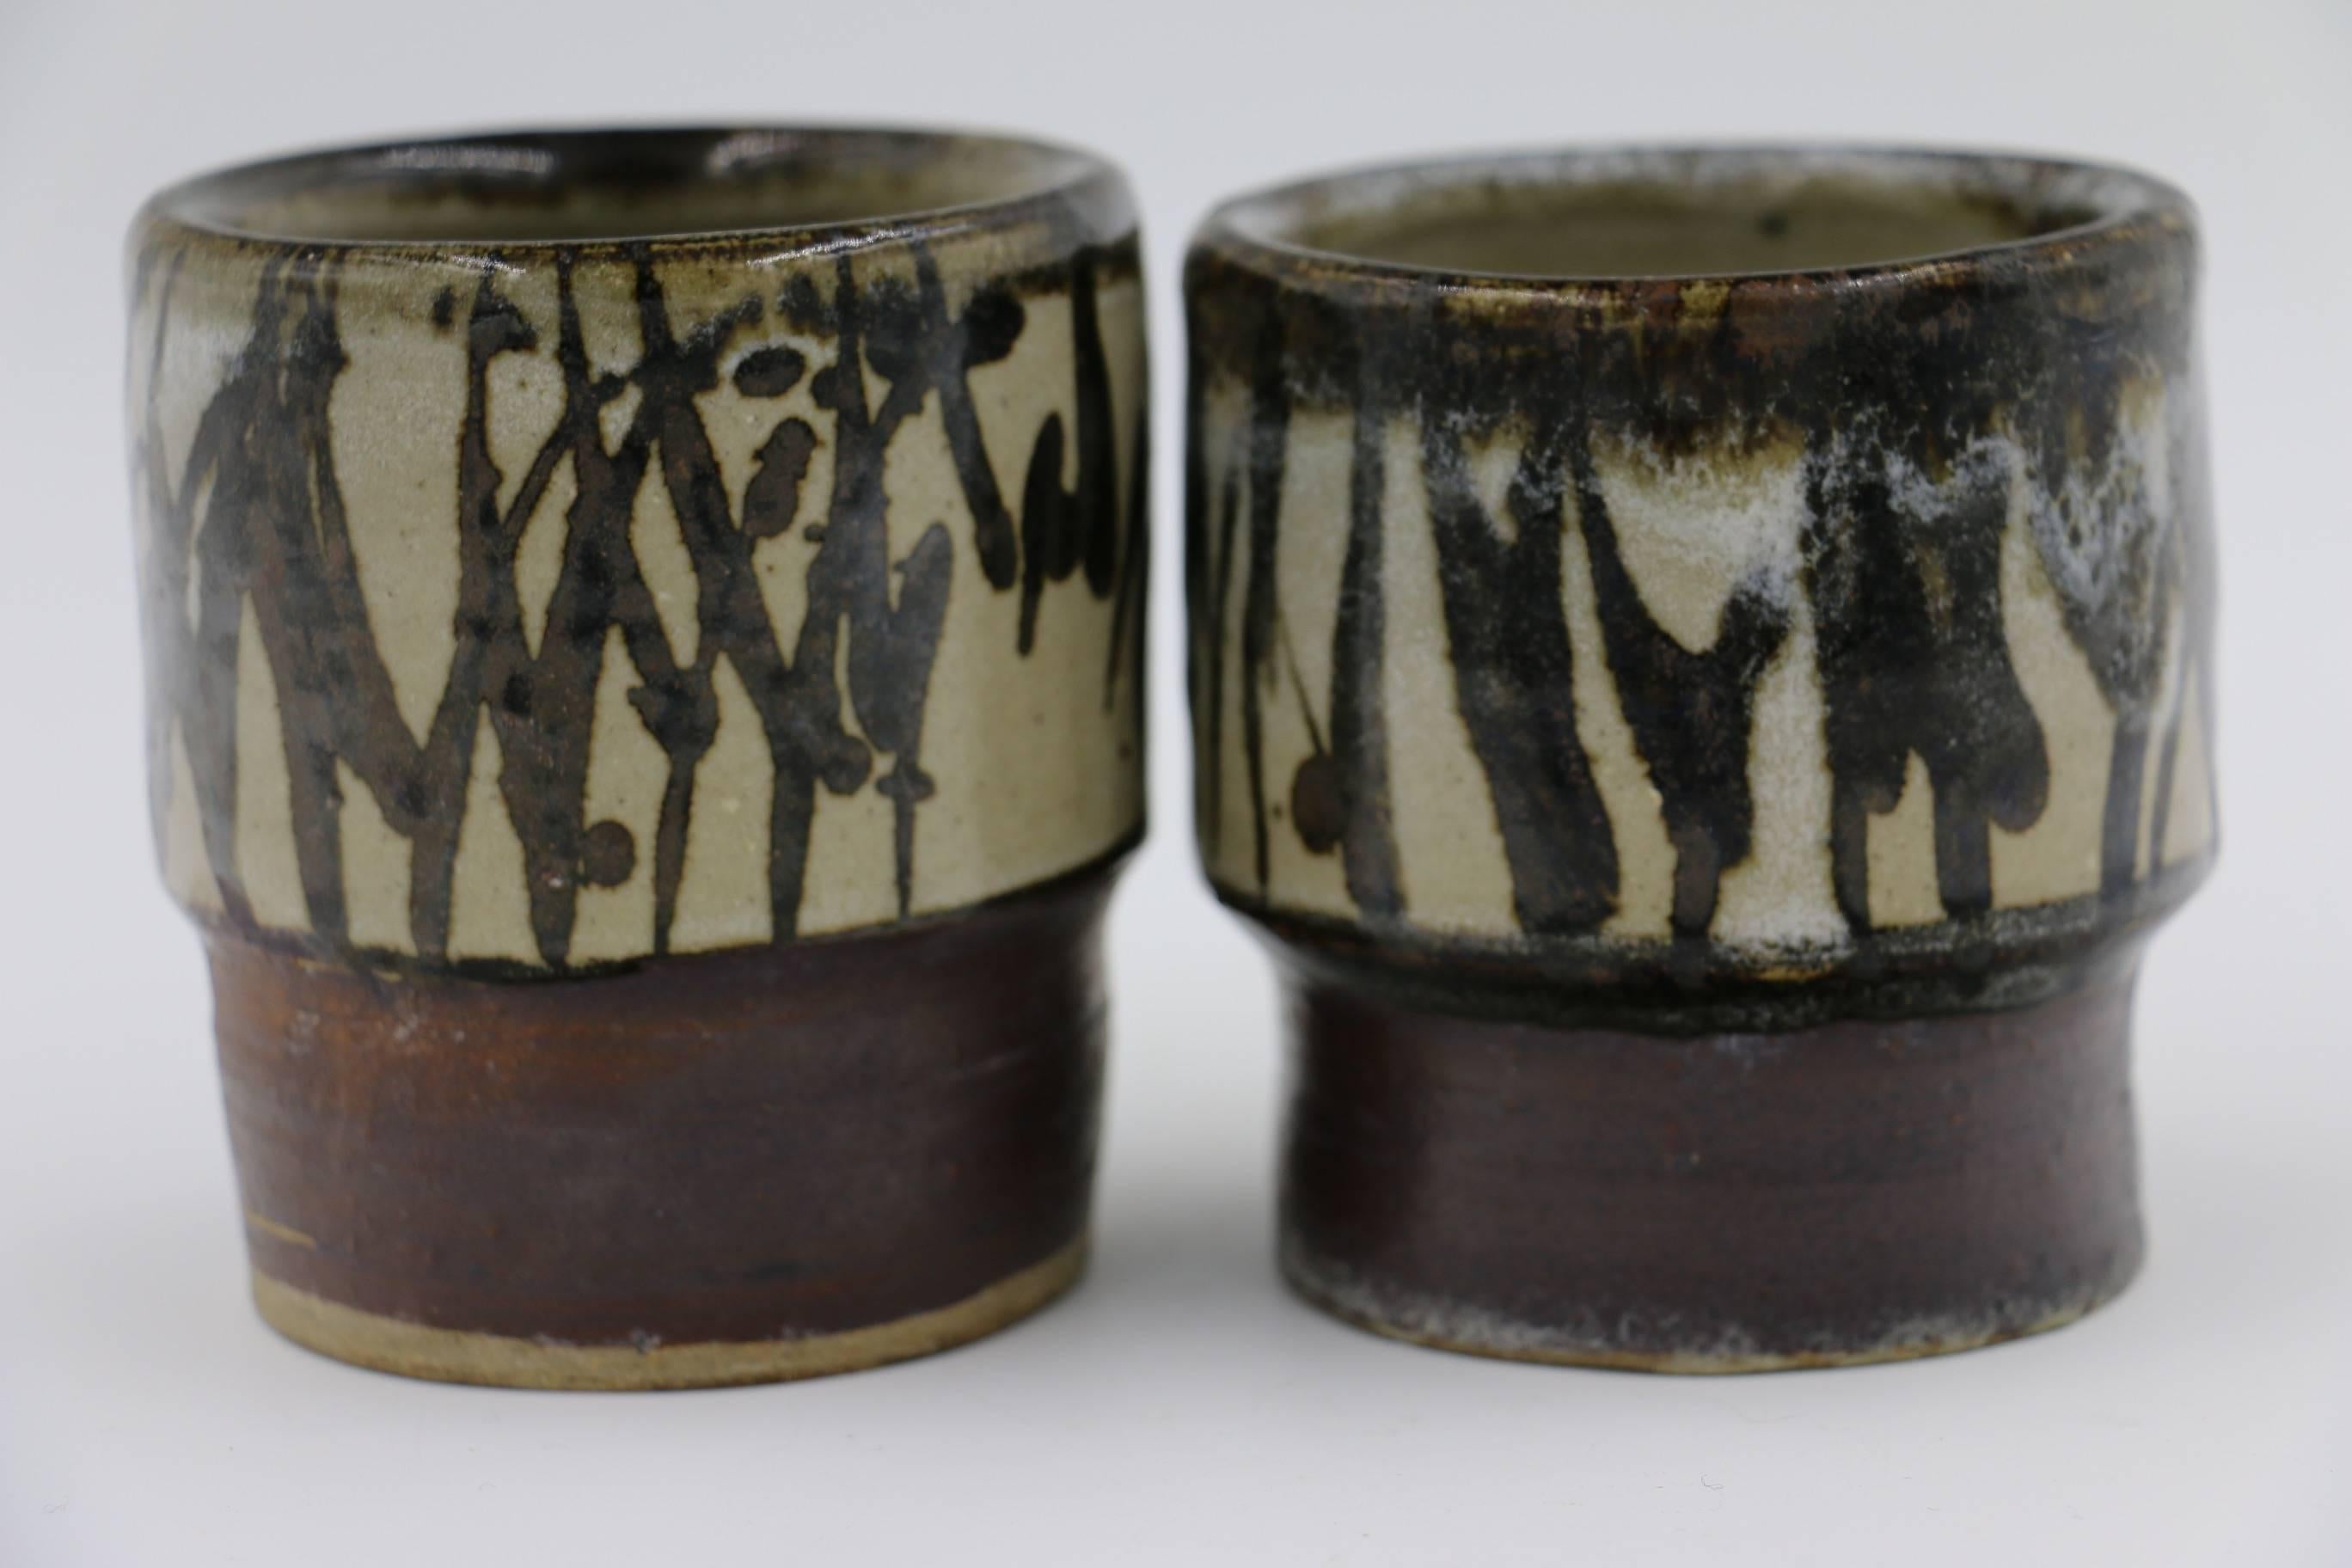 Kenneth Price was an American artist who uncovered the surprising possibilities of ceramics as sculpture. He is best known for his abstract shapes constructed from fired clay. These are an unusual pair of cups, signed by the artist.